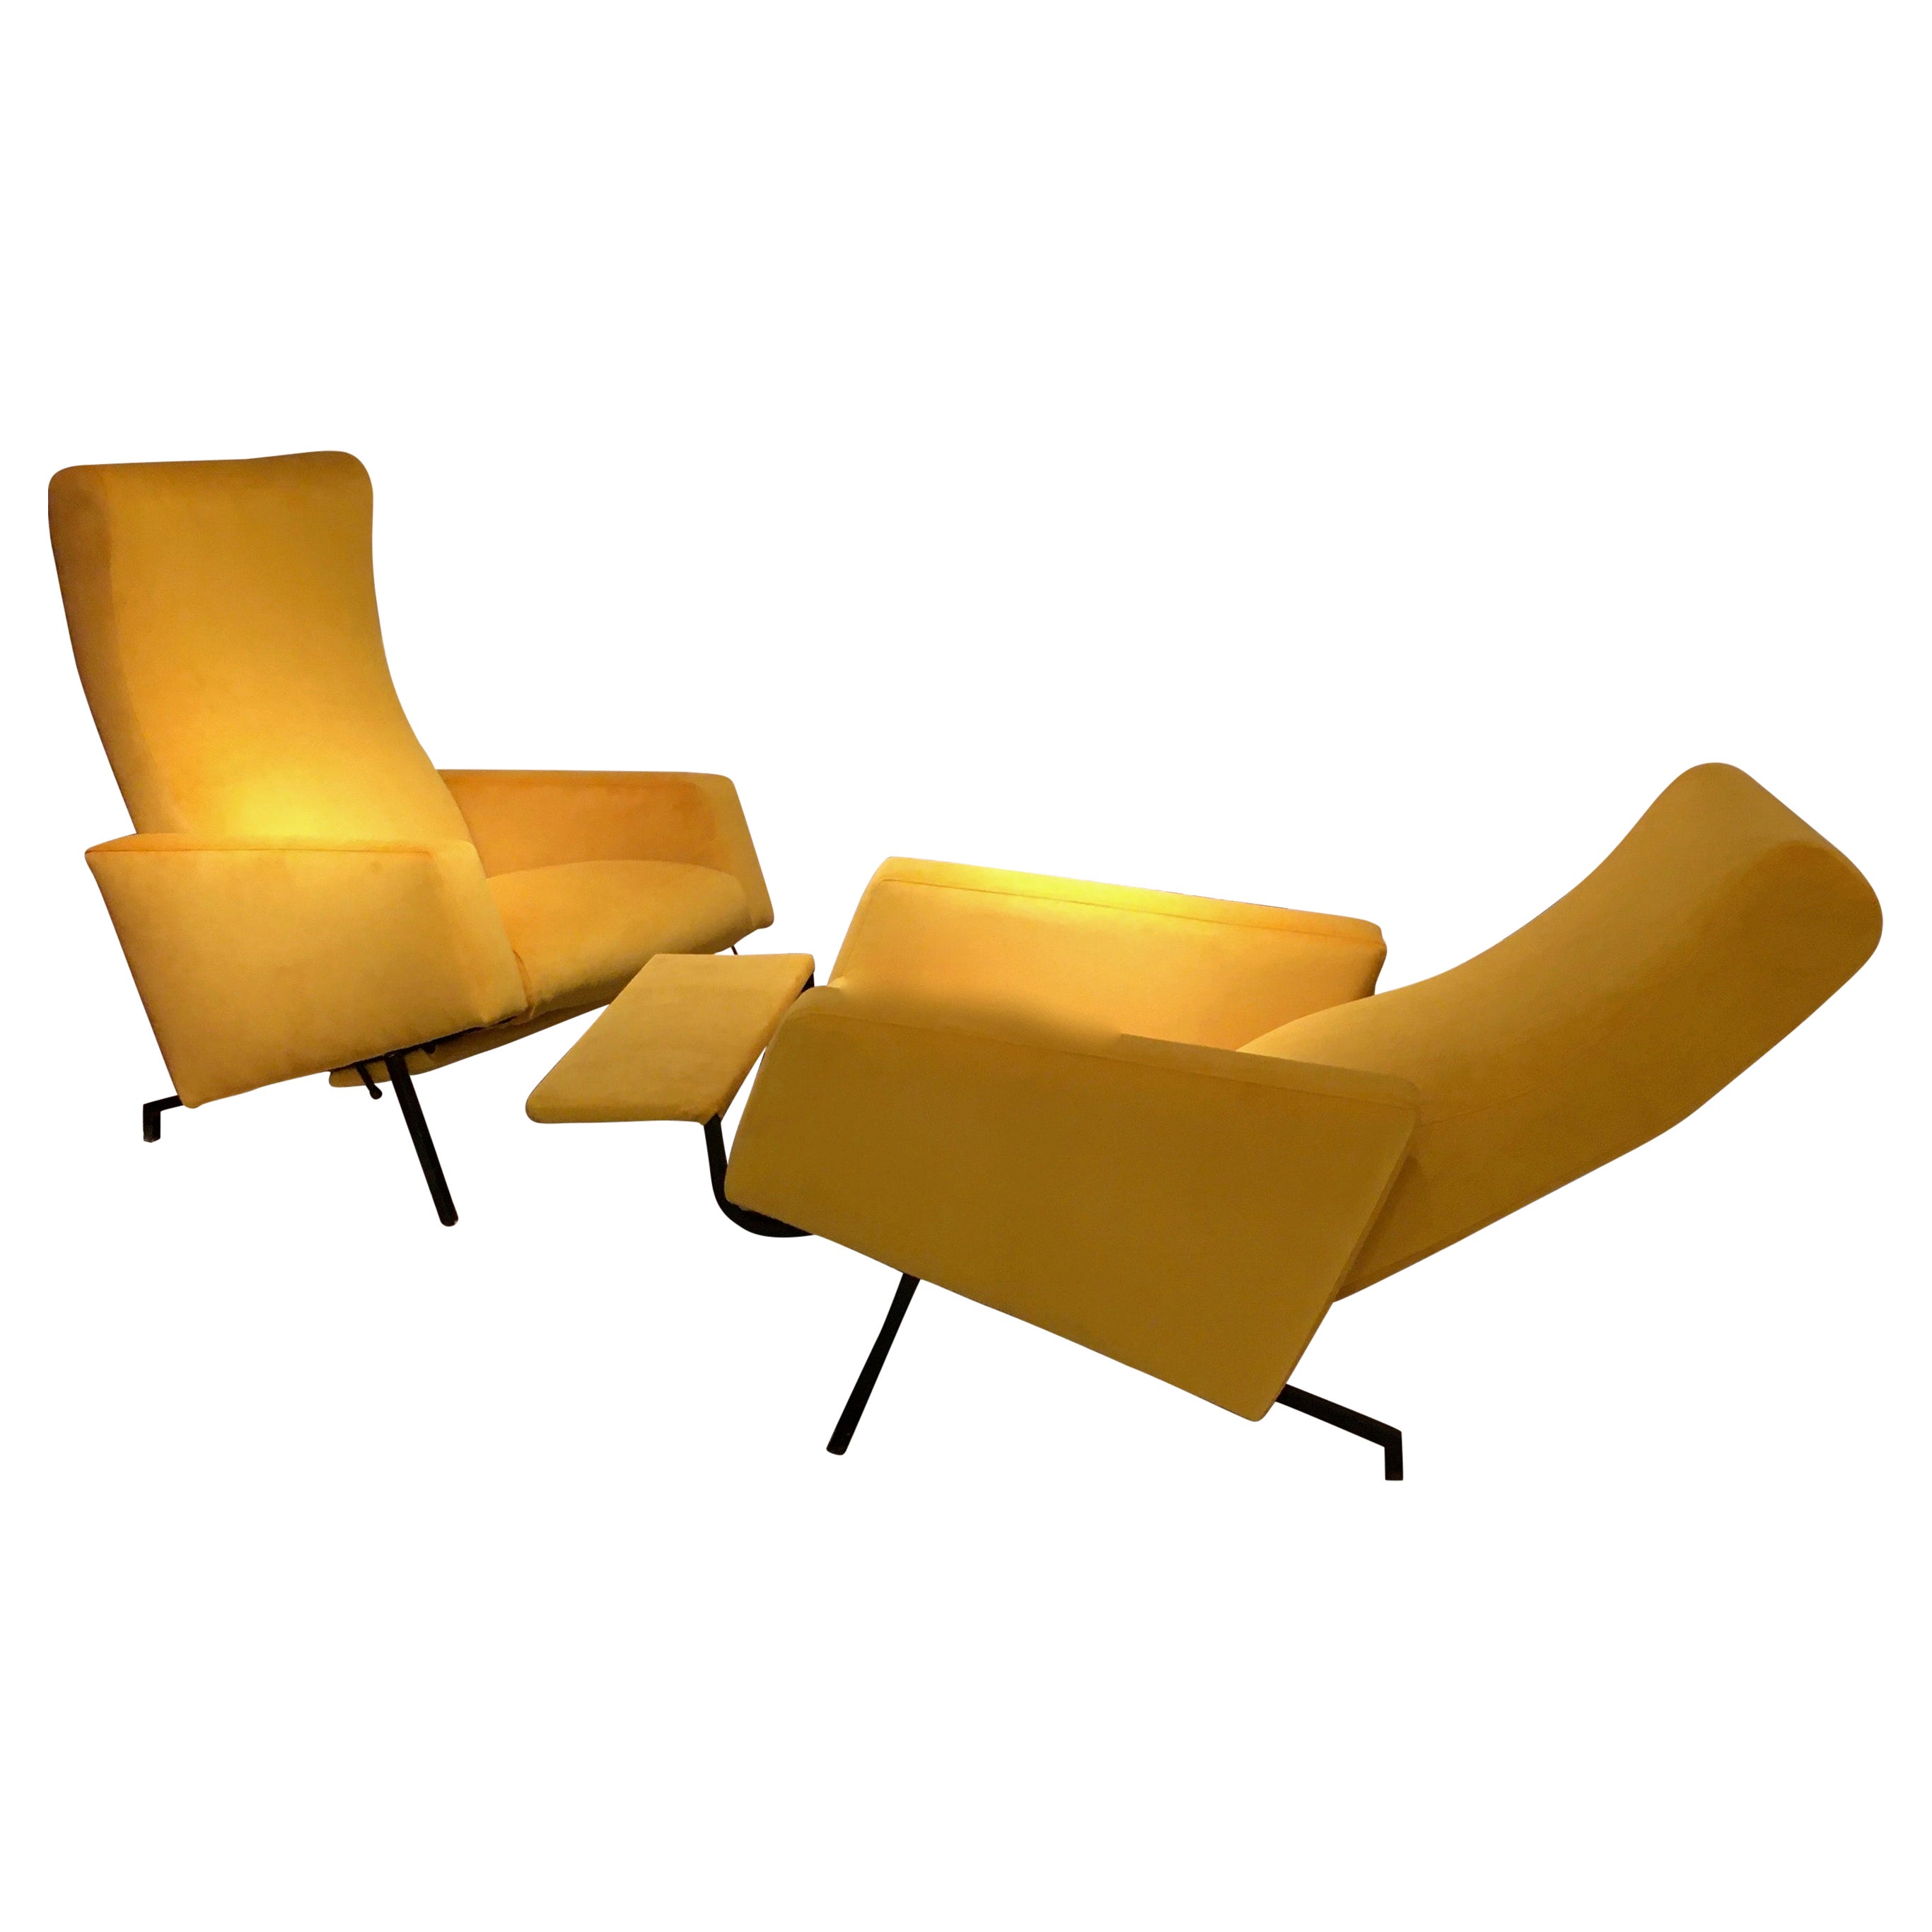 Fine Pair of Adjustable Trelax Chairs by Pierre Guariche, France, 1961 For Sale